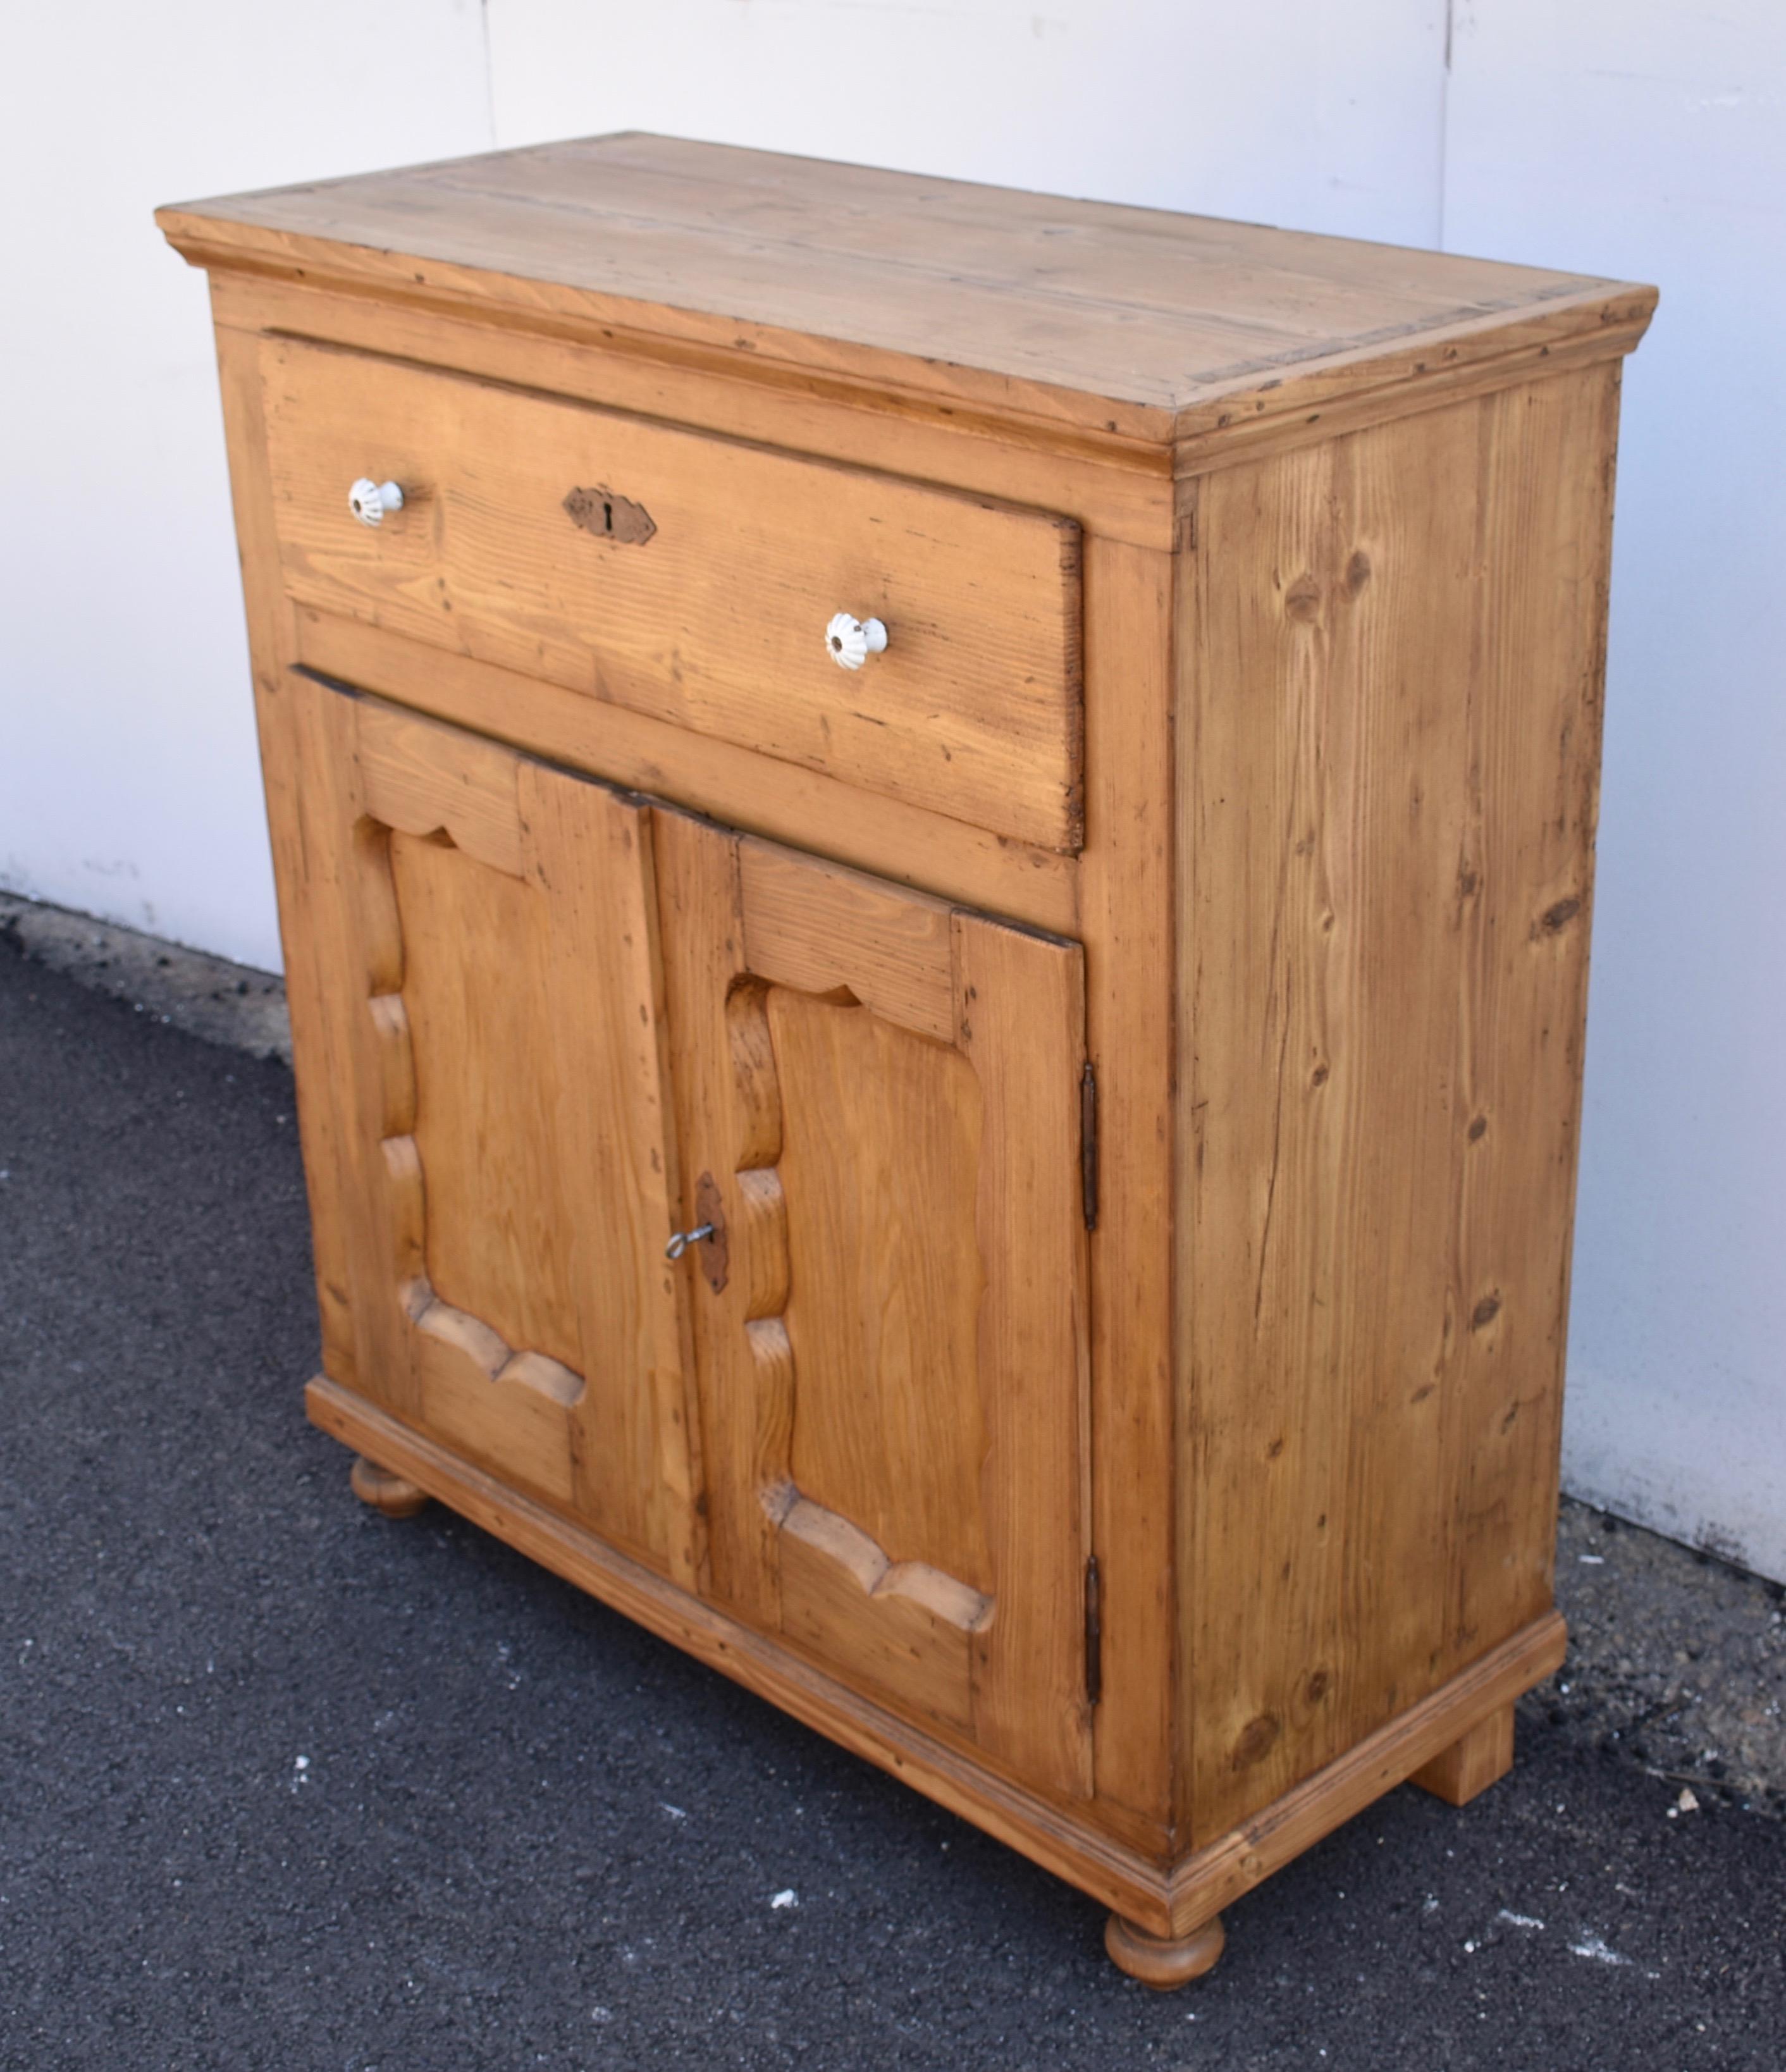 Polished Pine Dresser Base with Two Doors and One Drawer